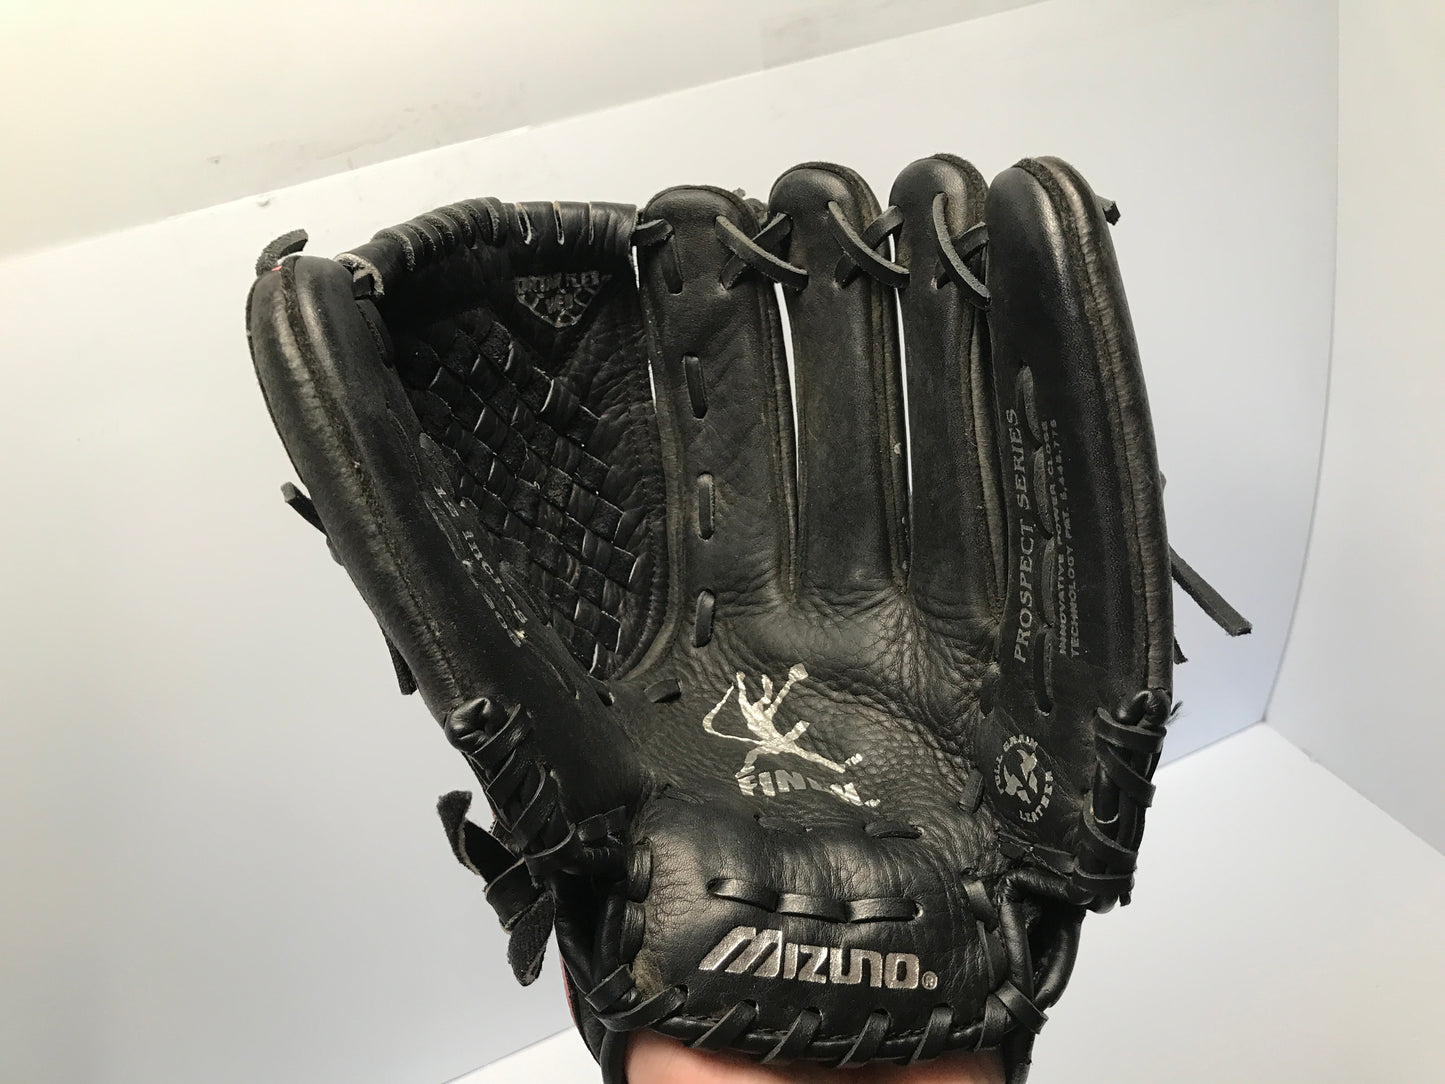 Baseball Glove 12in Mizuno Black Pink Leather Fits On Left Hand Excellent